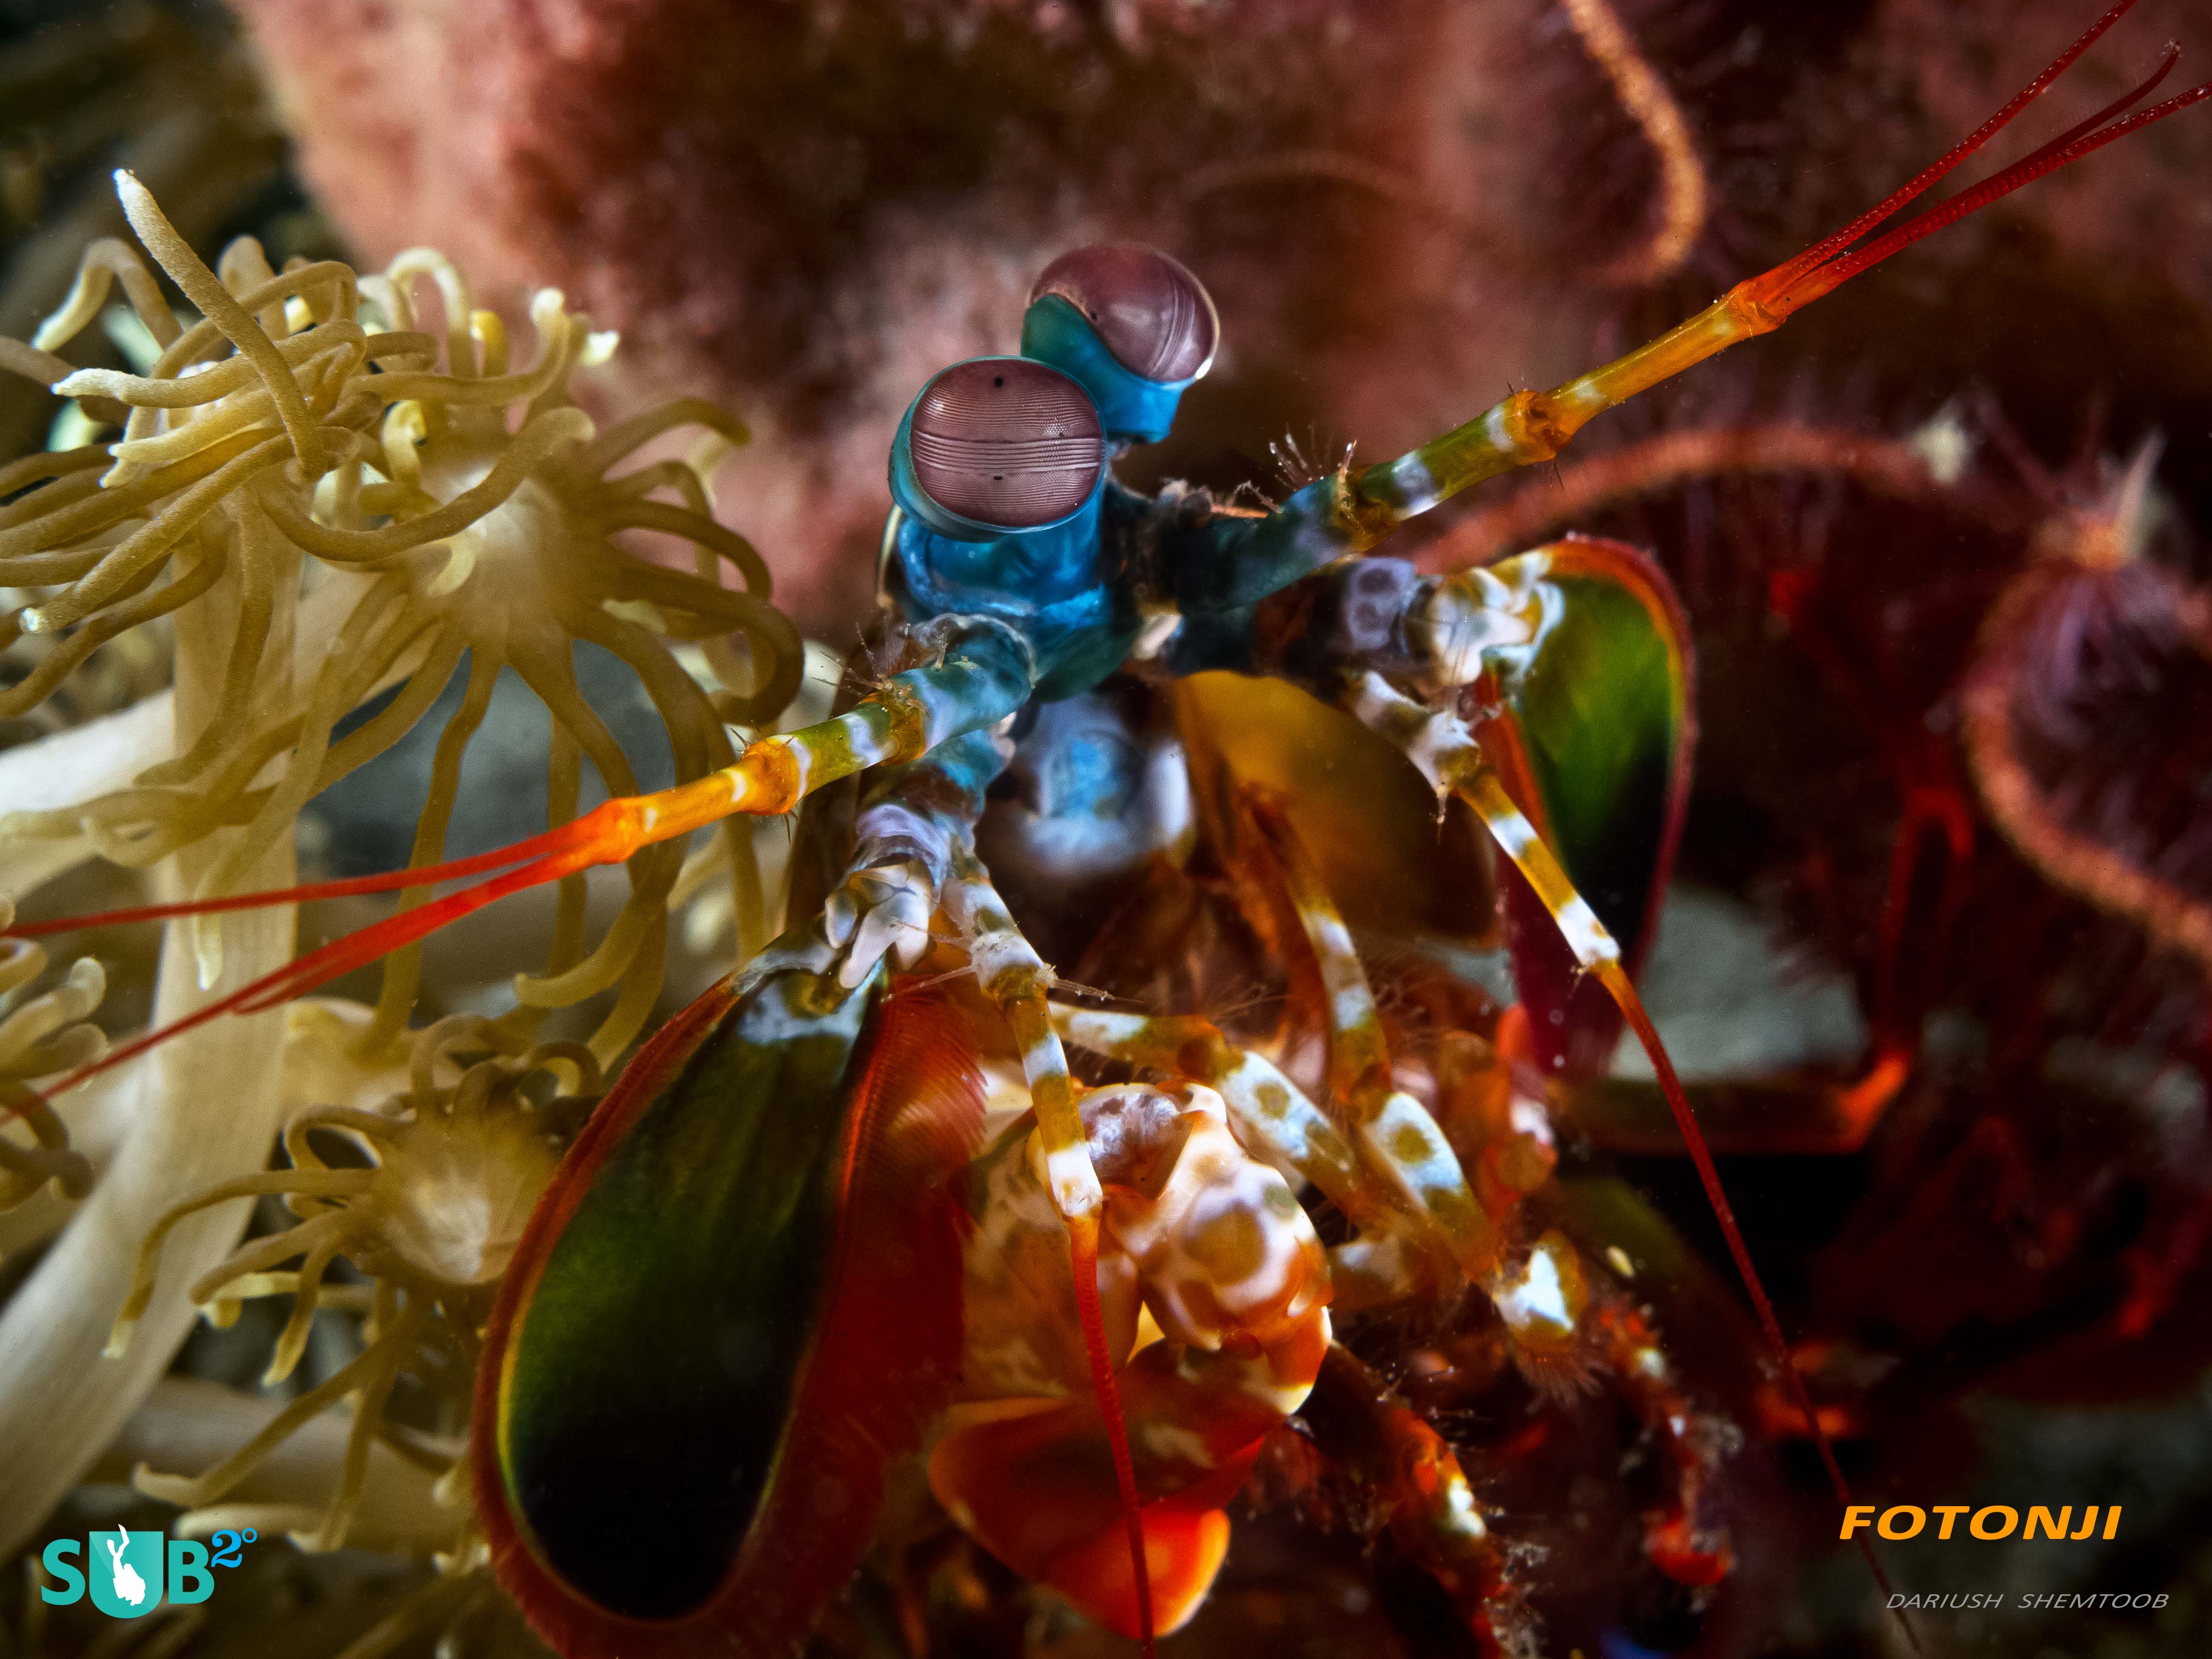 Mantis Shrimp proudly holding the record for fastest mechanical movement underwater.